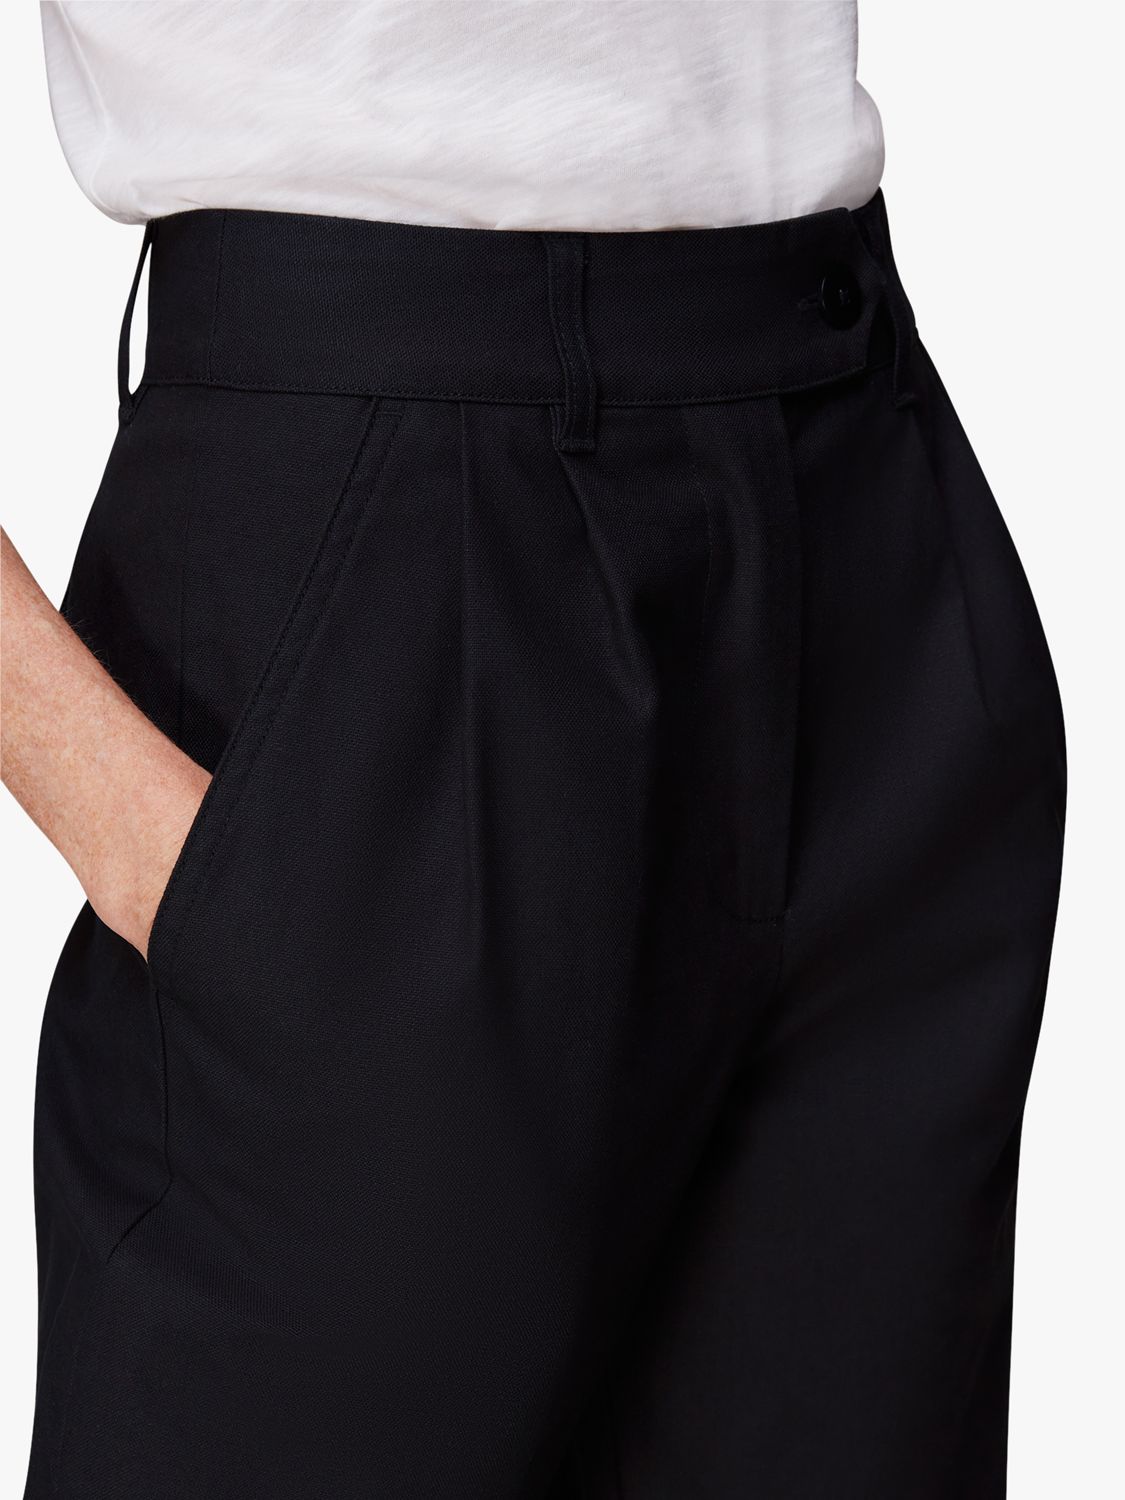 Whistles Robyn Wide Leg Trousers, Black at John Lewis & Partners